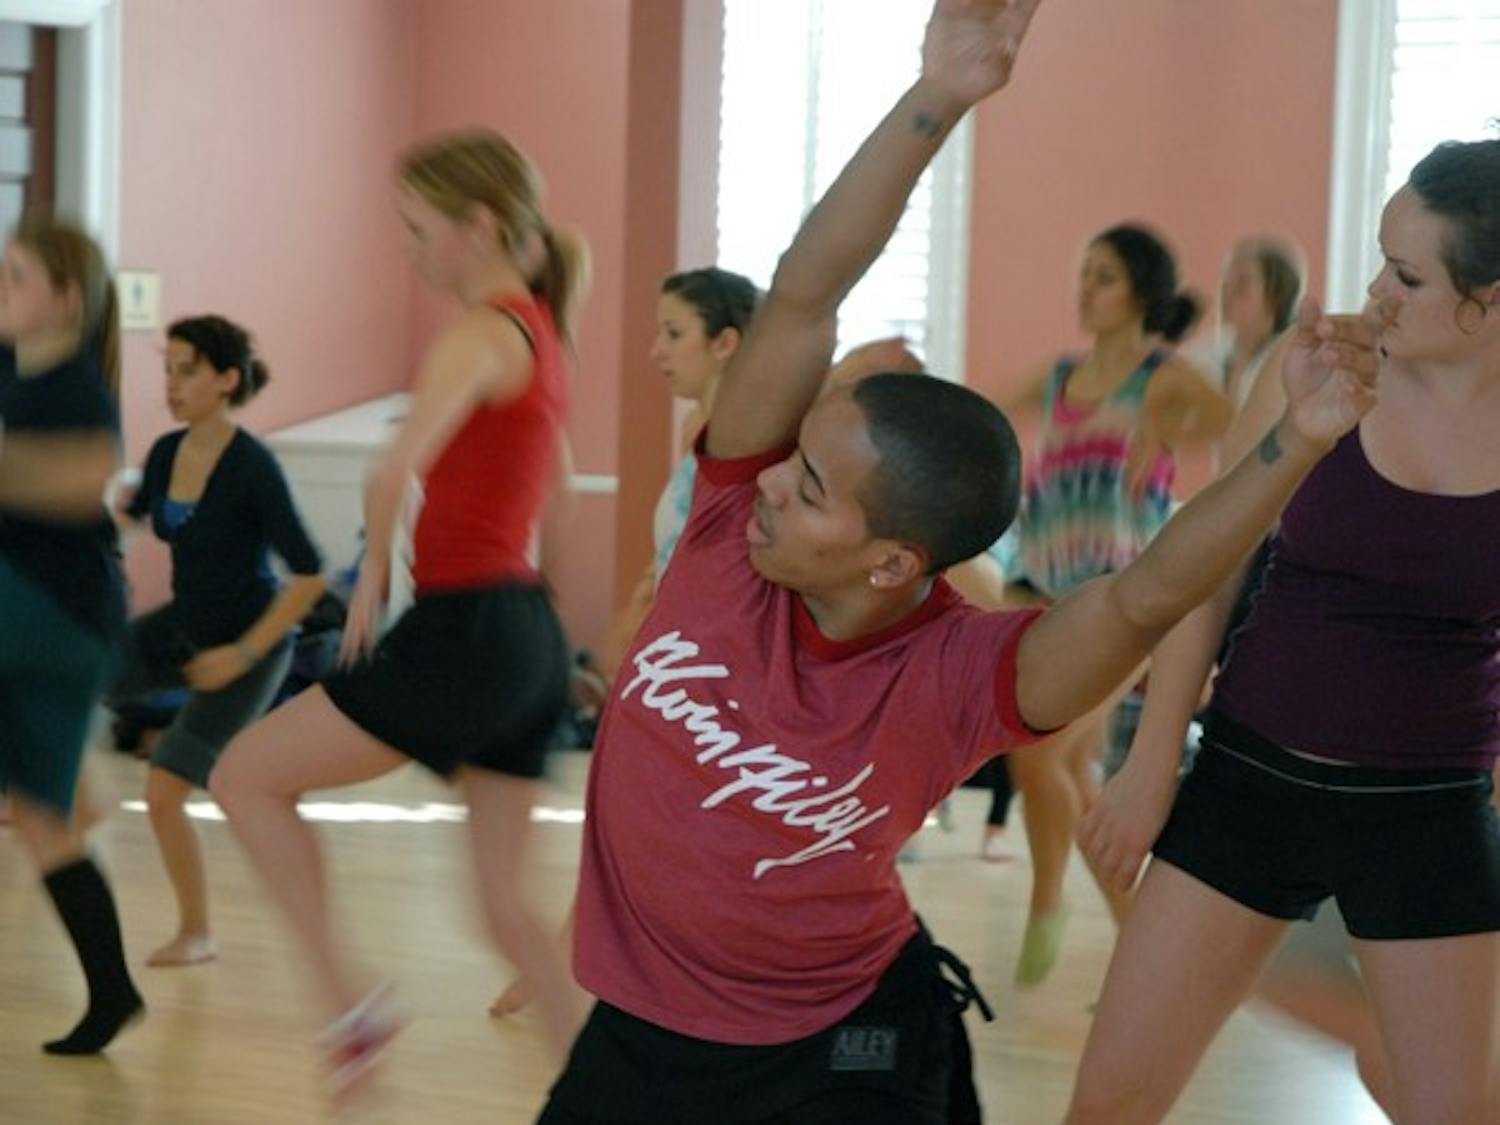 Daniel Harder, instructor of the Alvin Ailey II dance company, leads a group of dancers at UNC’s Gerrard Hall. DTH/Lauren Vied